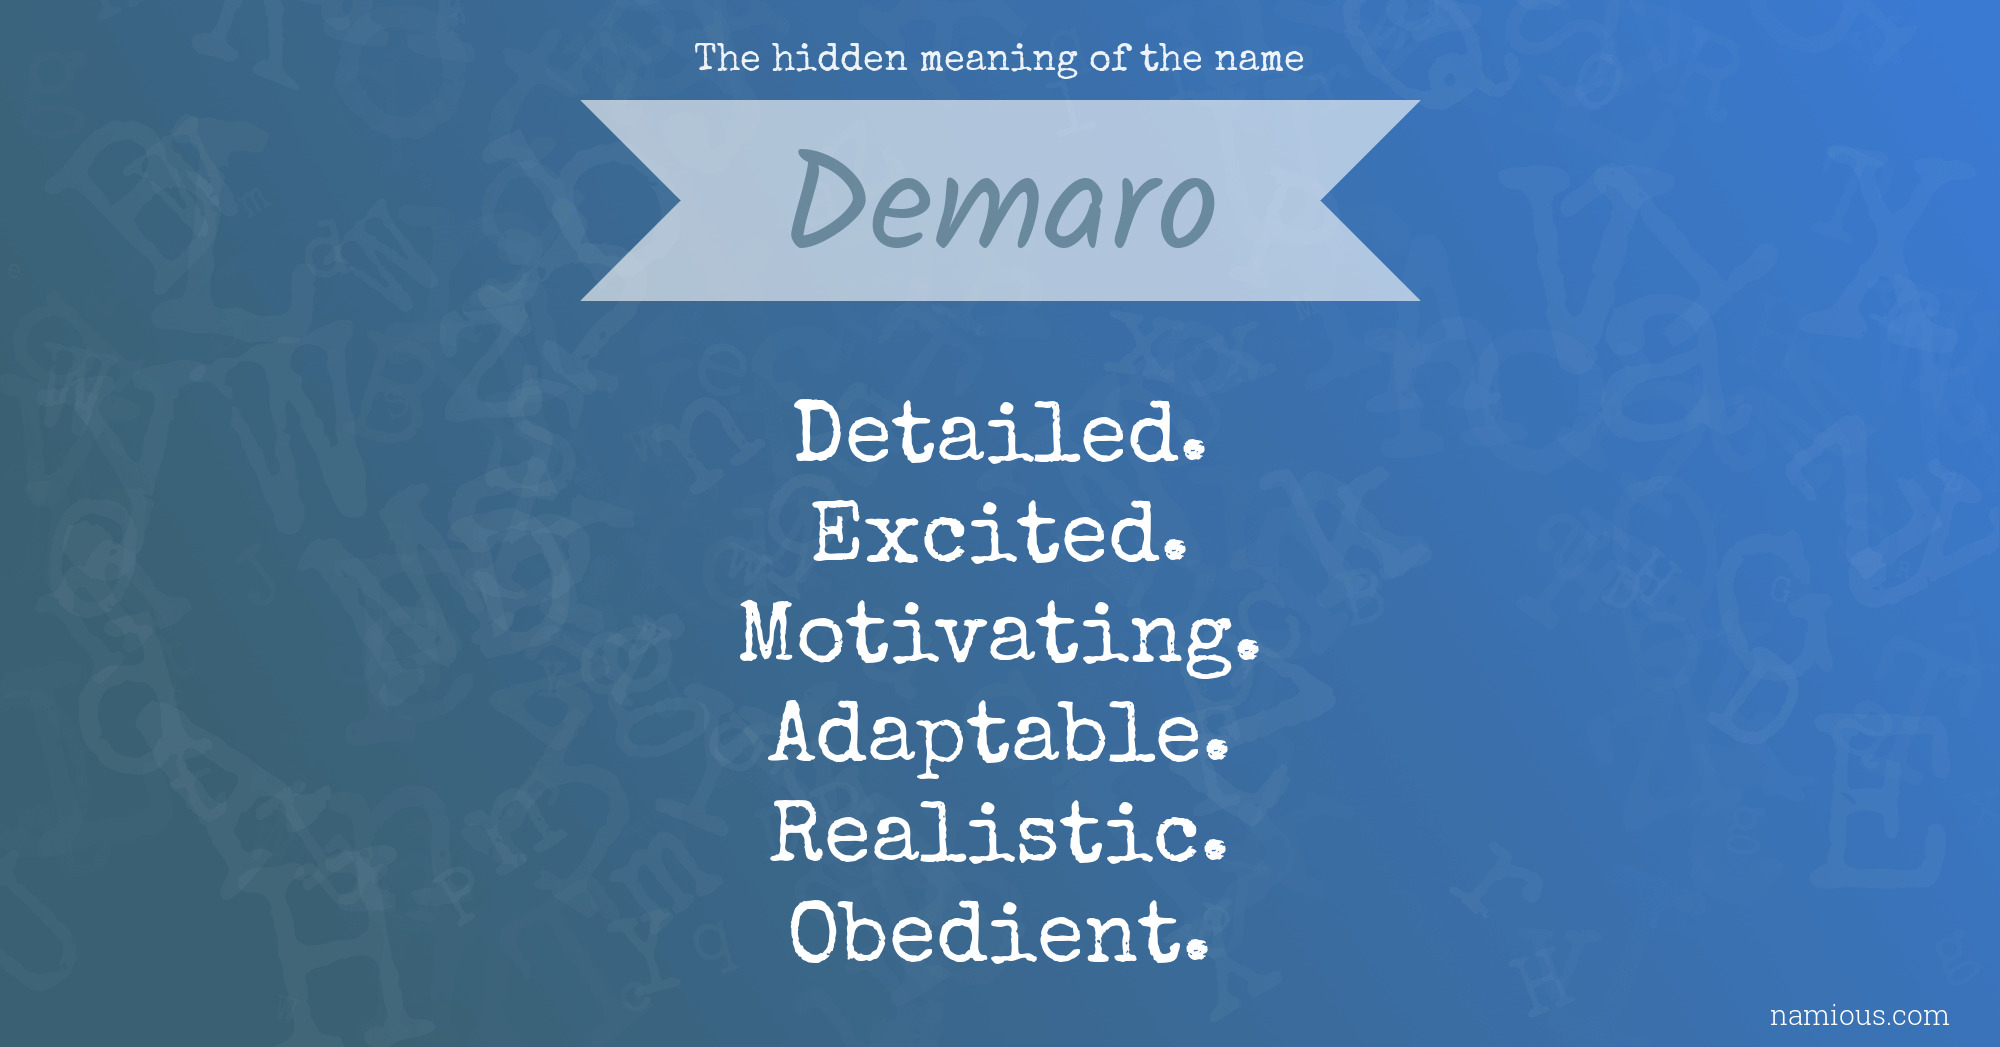 The hidden meaning of the name Demaro